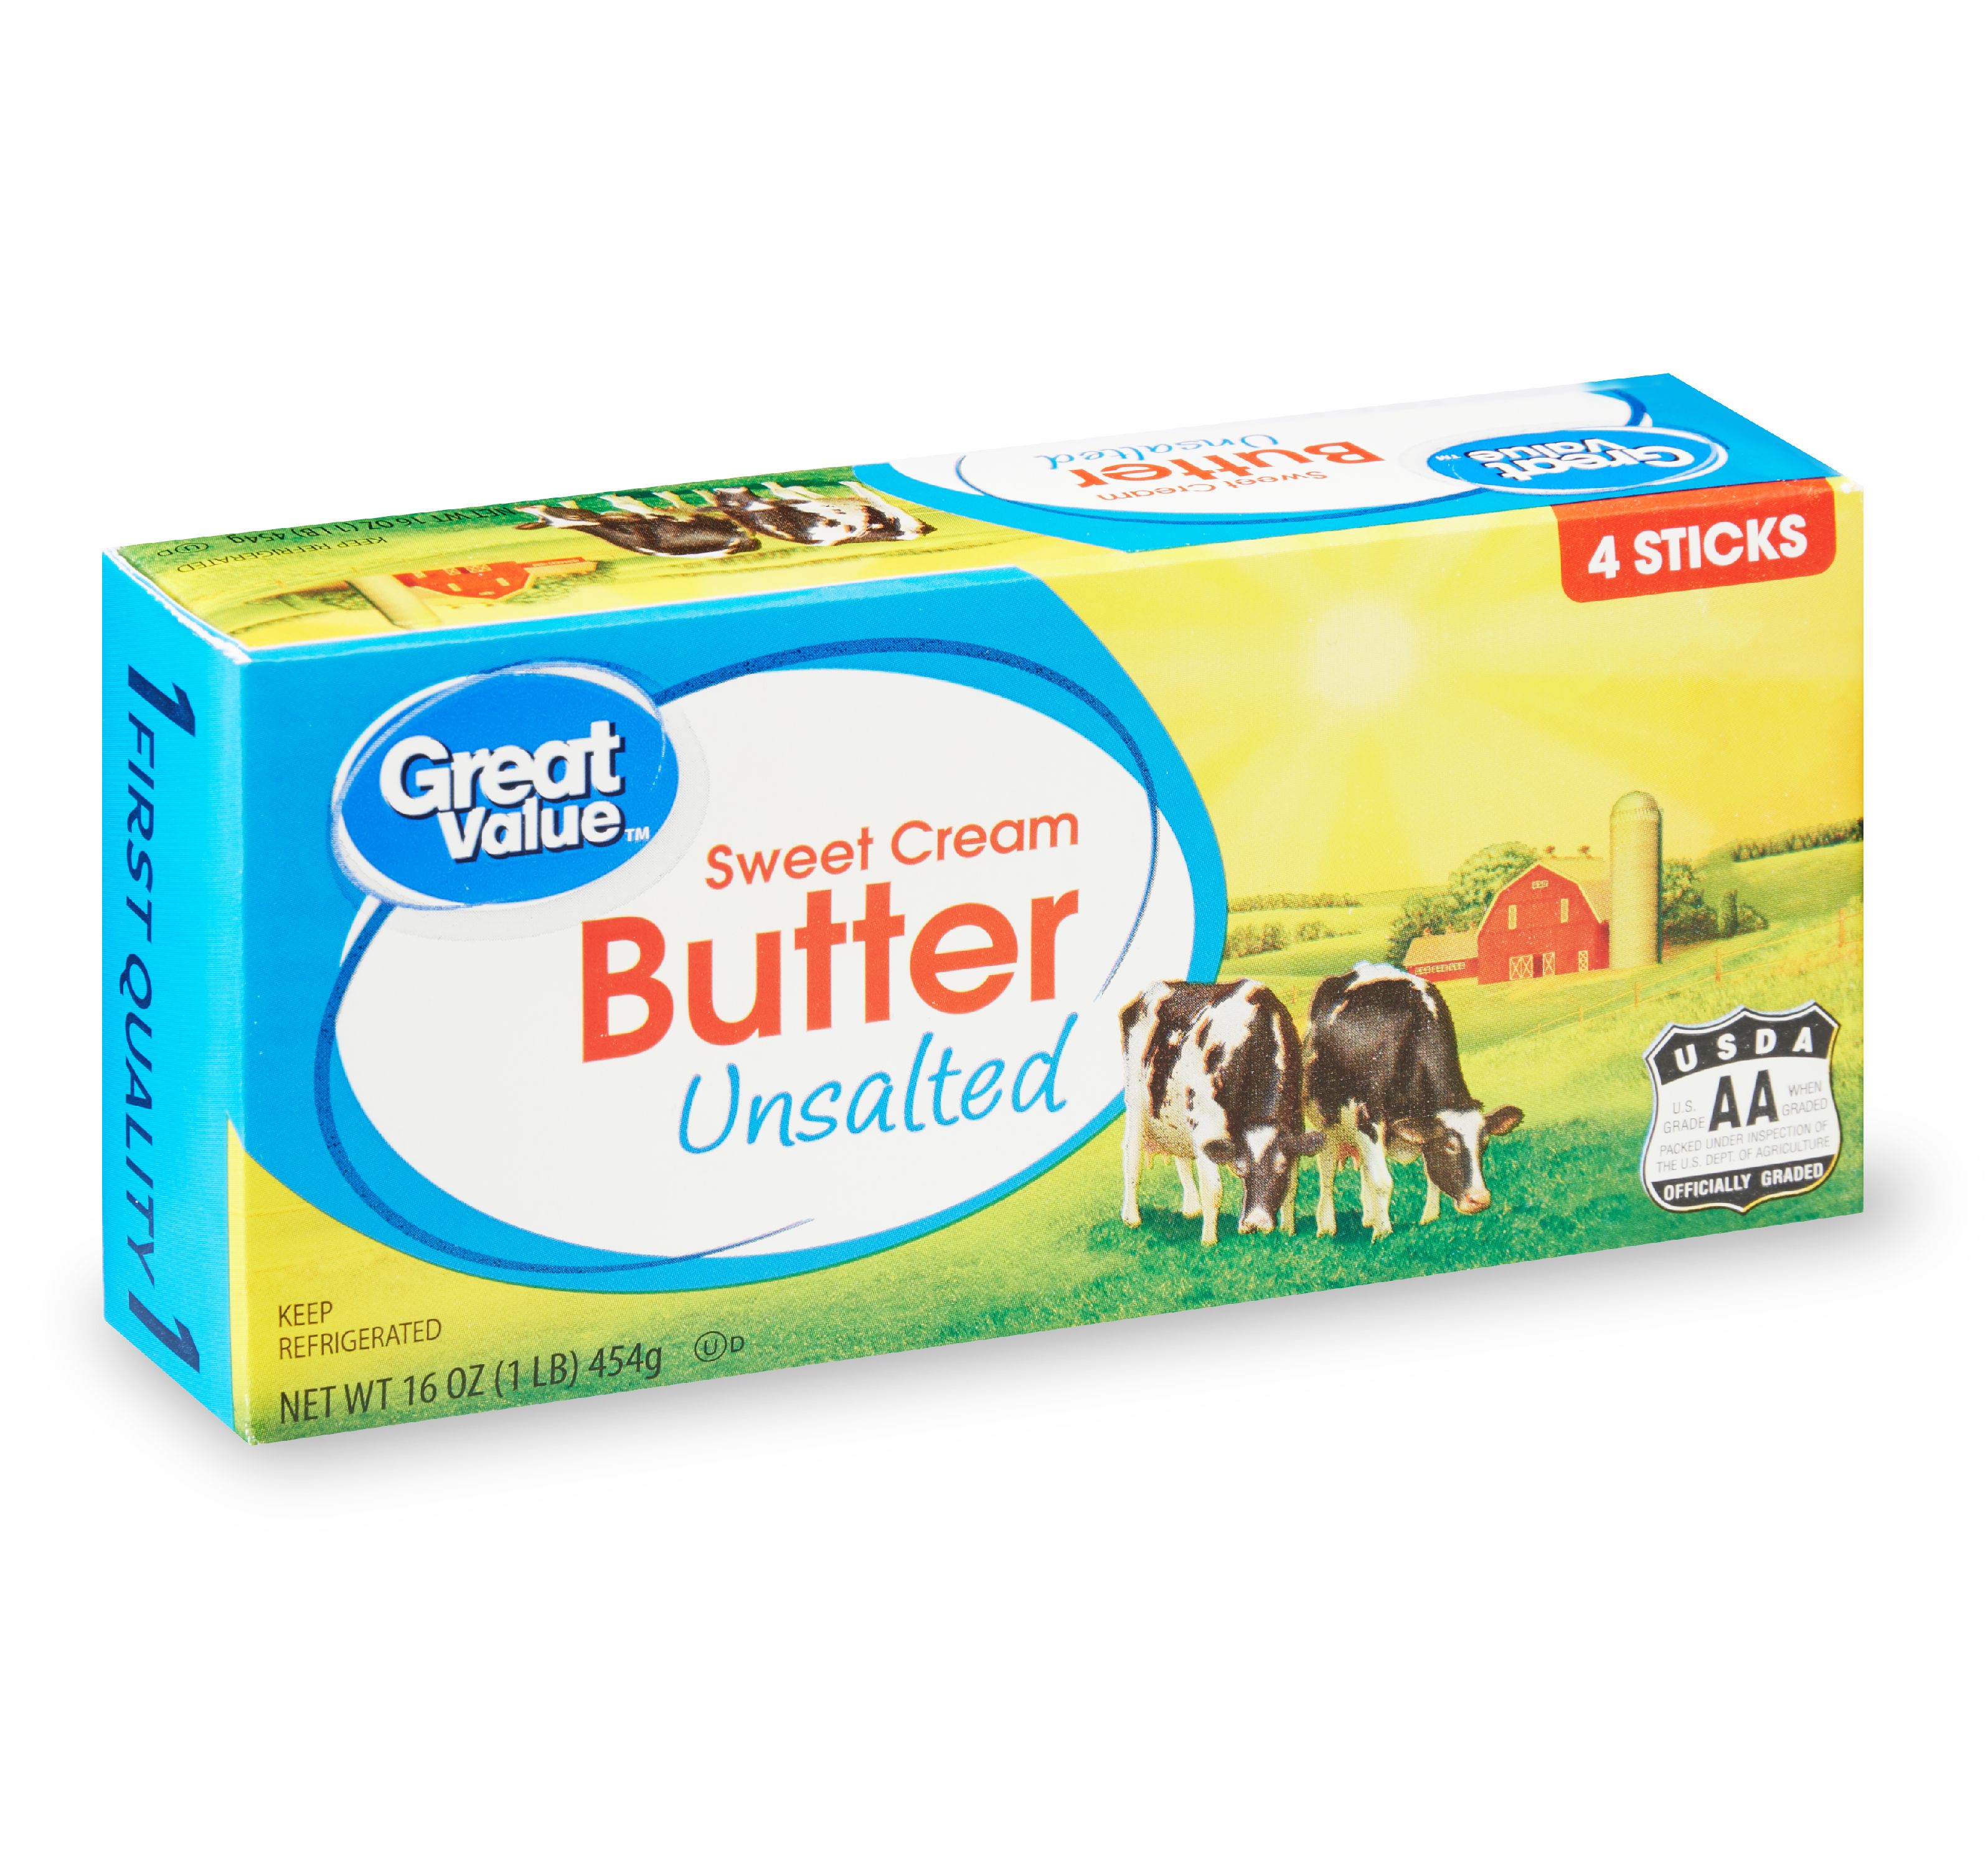 Great Value Sweet Cream Unsalted Butter Sticks, 16 Oz, 4 Count Image